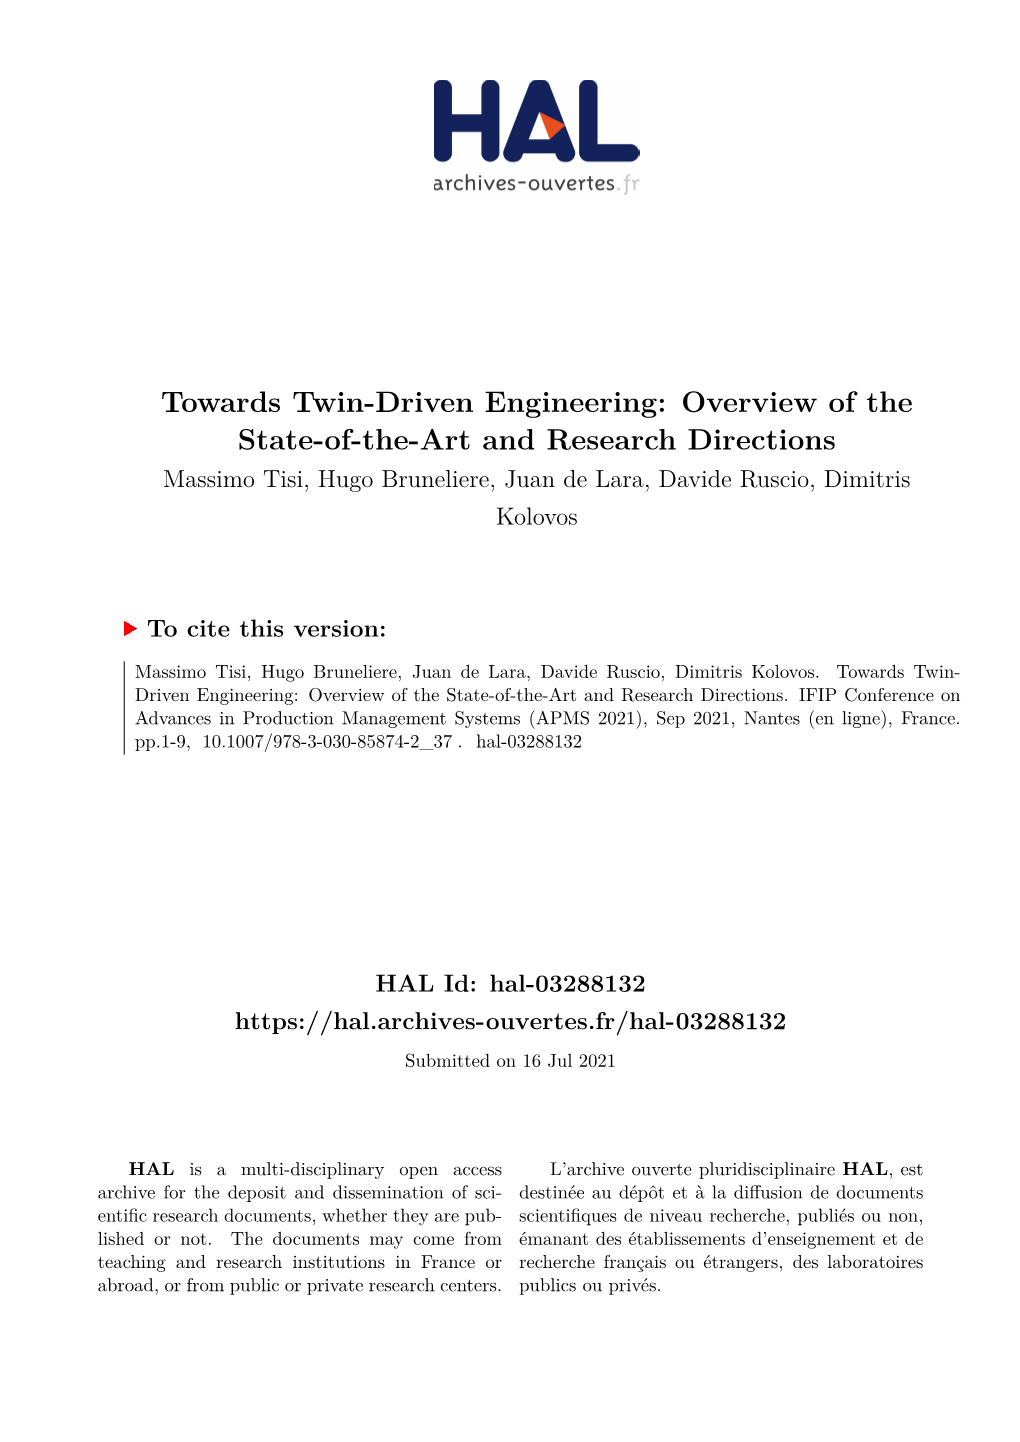 Towards Twin-Driven Engineering: Overview of the State-Of-The-Art and Research Directions Massimo Tisi, Hugo Bruneliere, Juan De Lara, Davide Ruscio, Dimitris Kolovos